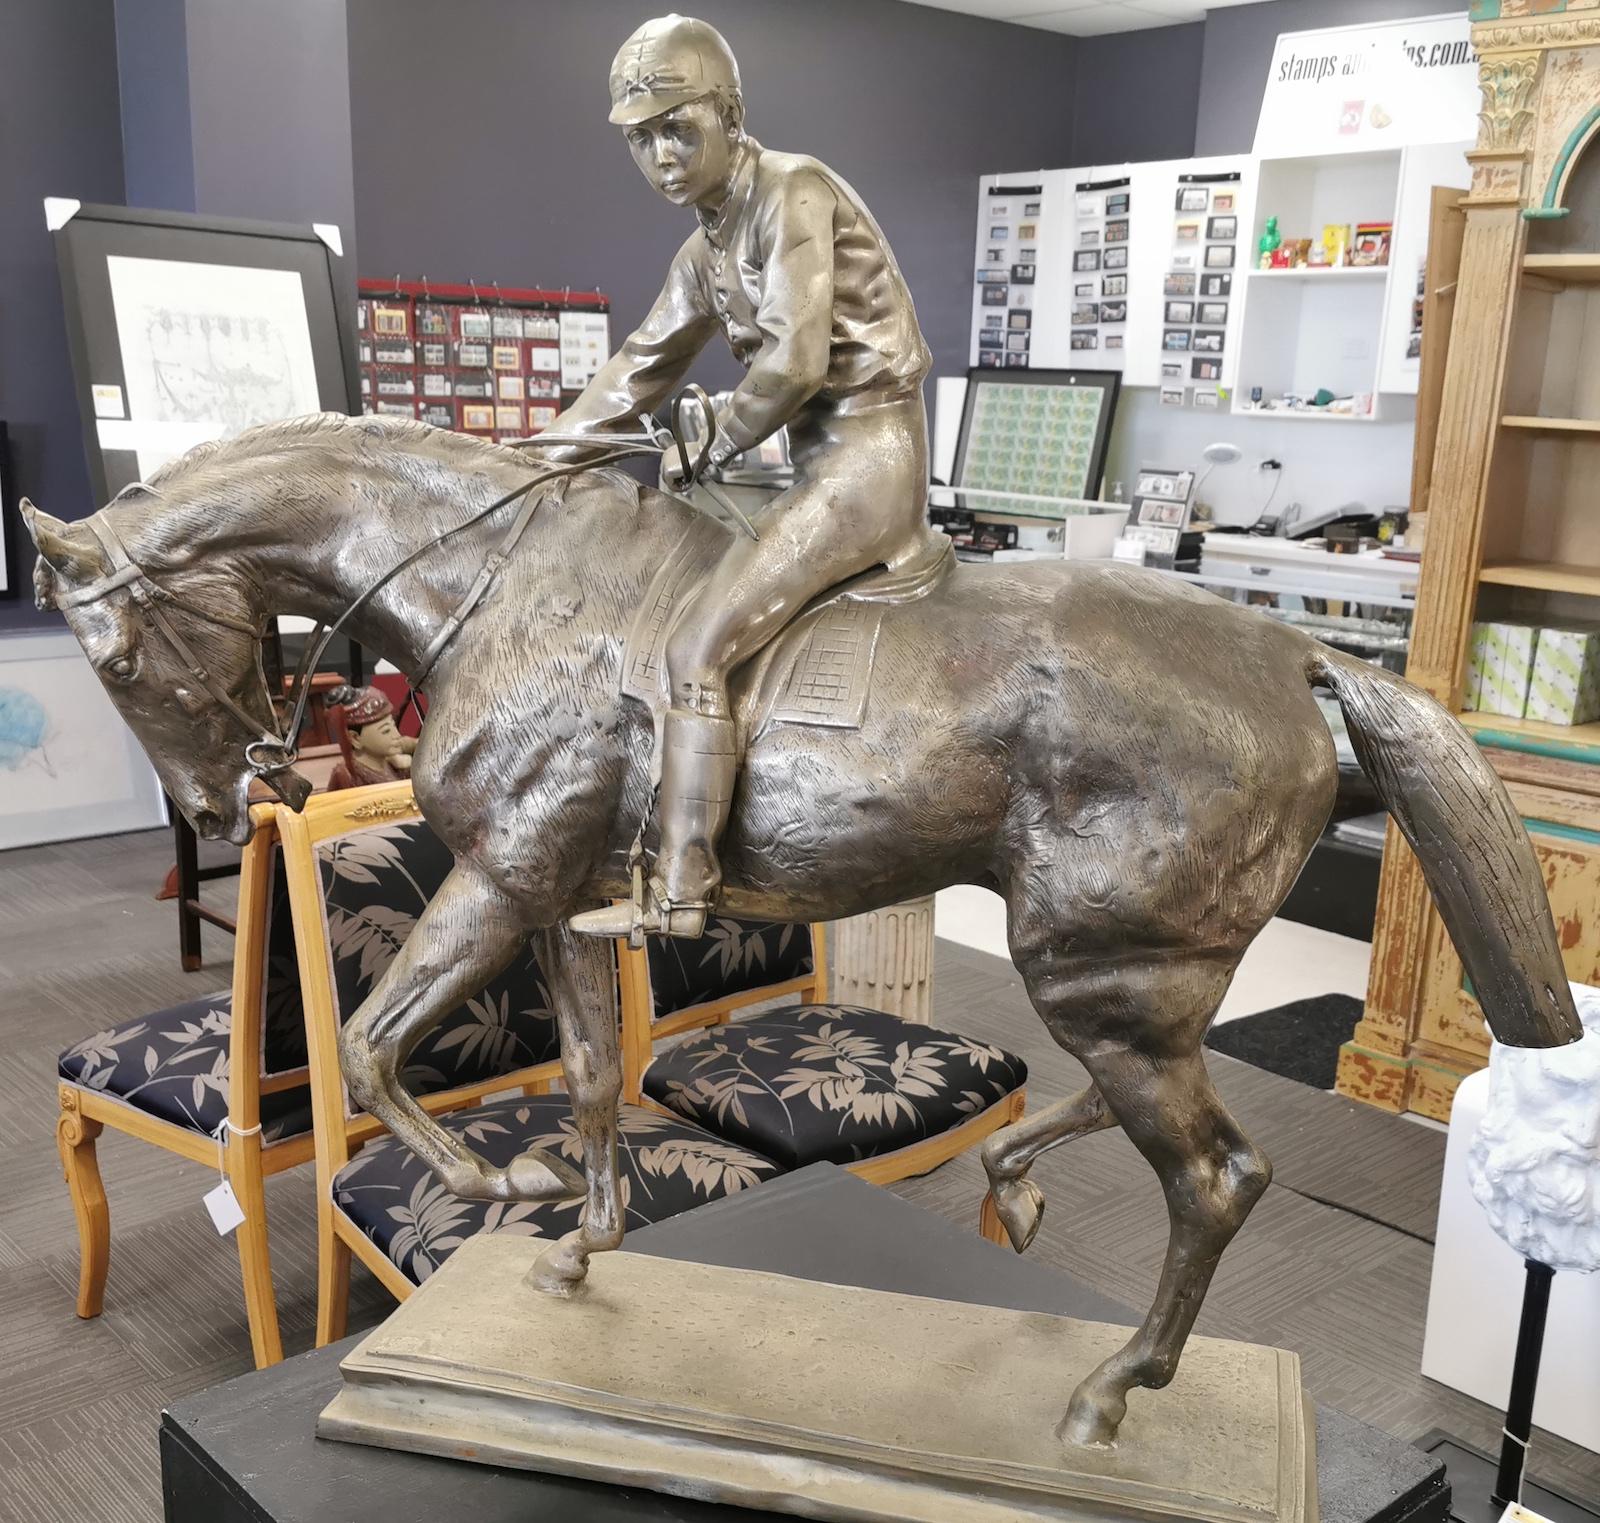 Le Grande Jockey, Isidore-Jules Bonheur (1827-1901) replica bronze sculpture.
Bonheur regularly exhibited at the Paris Salons. He specialised in animalier sculptures with a special emphasis on horse bronzes. He exhibited both paintings and bronzes